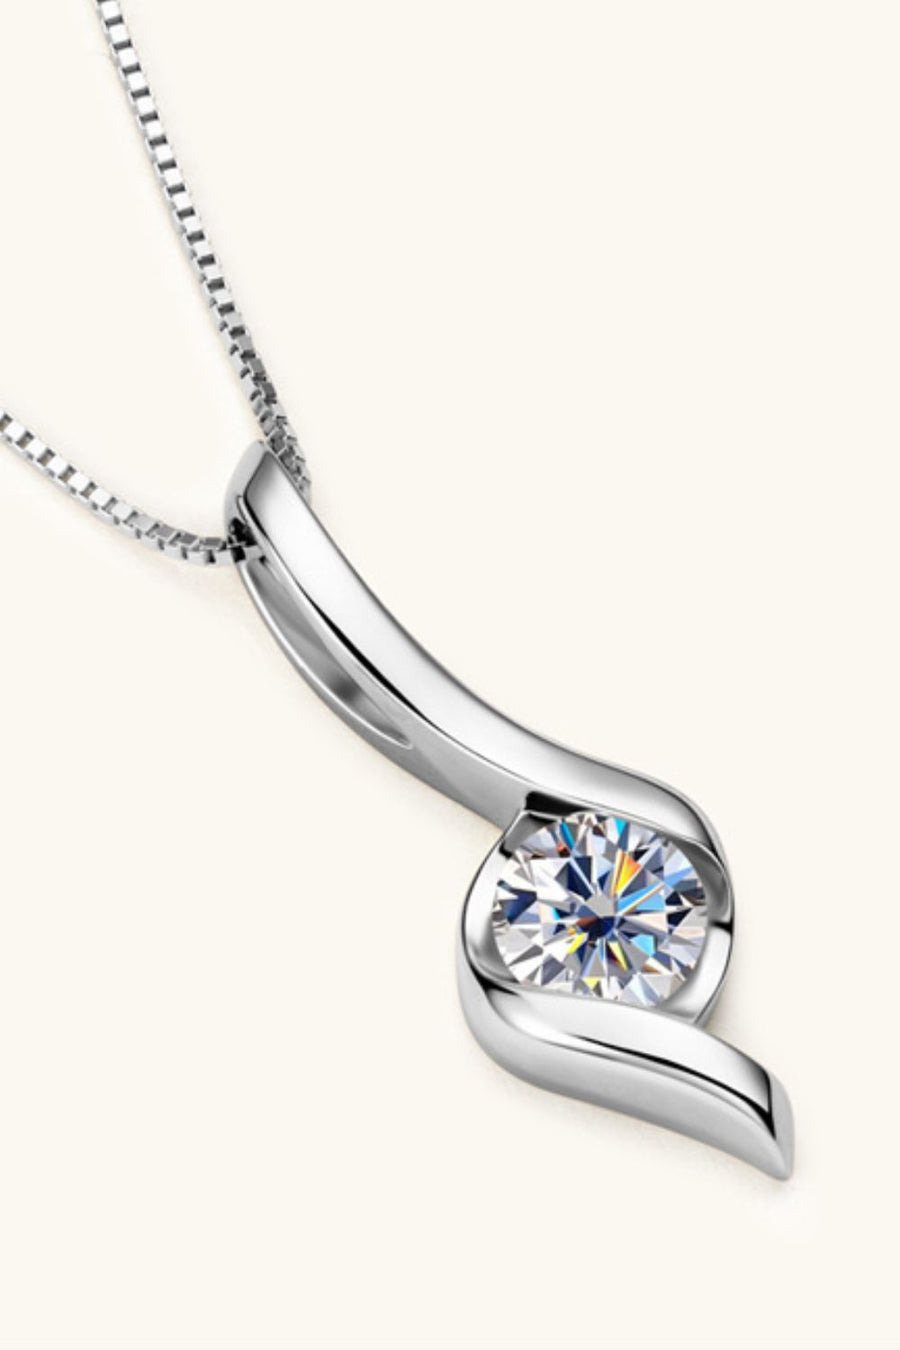 1 Carat Moissanite Necklace, Sterling Silver Chain Necklace, Moissanite Solitaire Necklace, Sparkling Pendant Necklace, Gemstone Sterling Silver Necklace, Ethically Sourced Jewelry, Luxurious Silver Necklace, Elegant Moissanite Jewelry, Timeless Solitaire Necklace, Affordable Luxury Necklace.